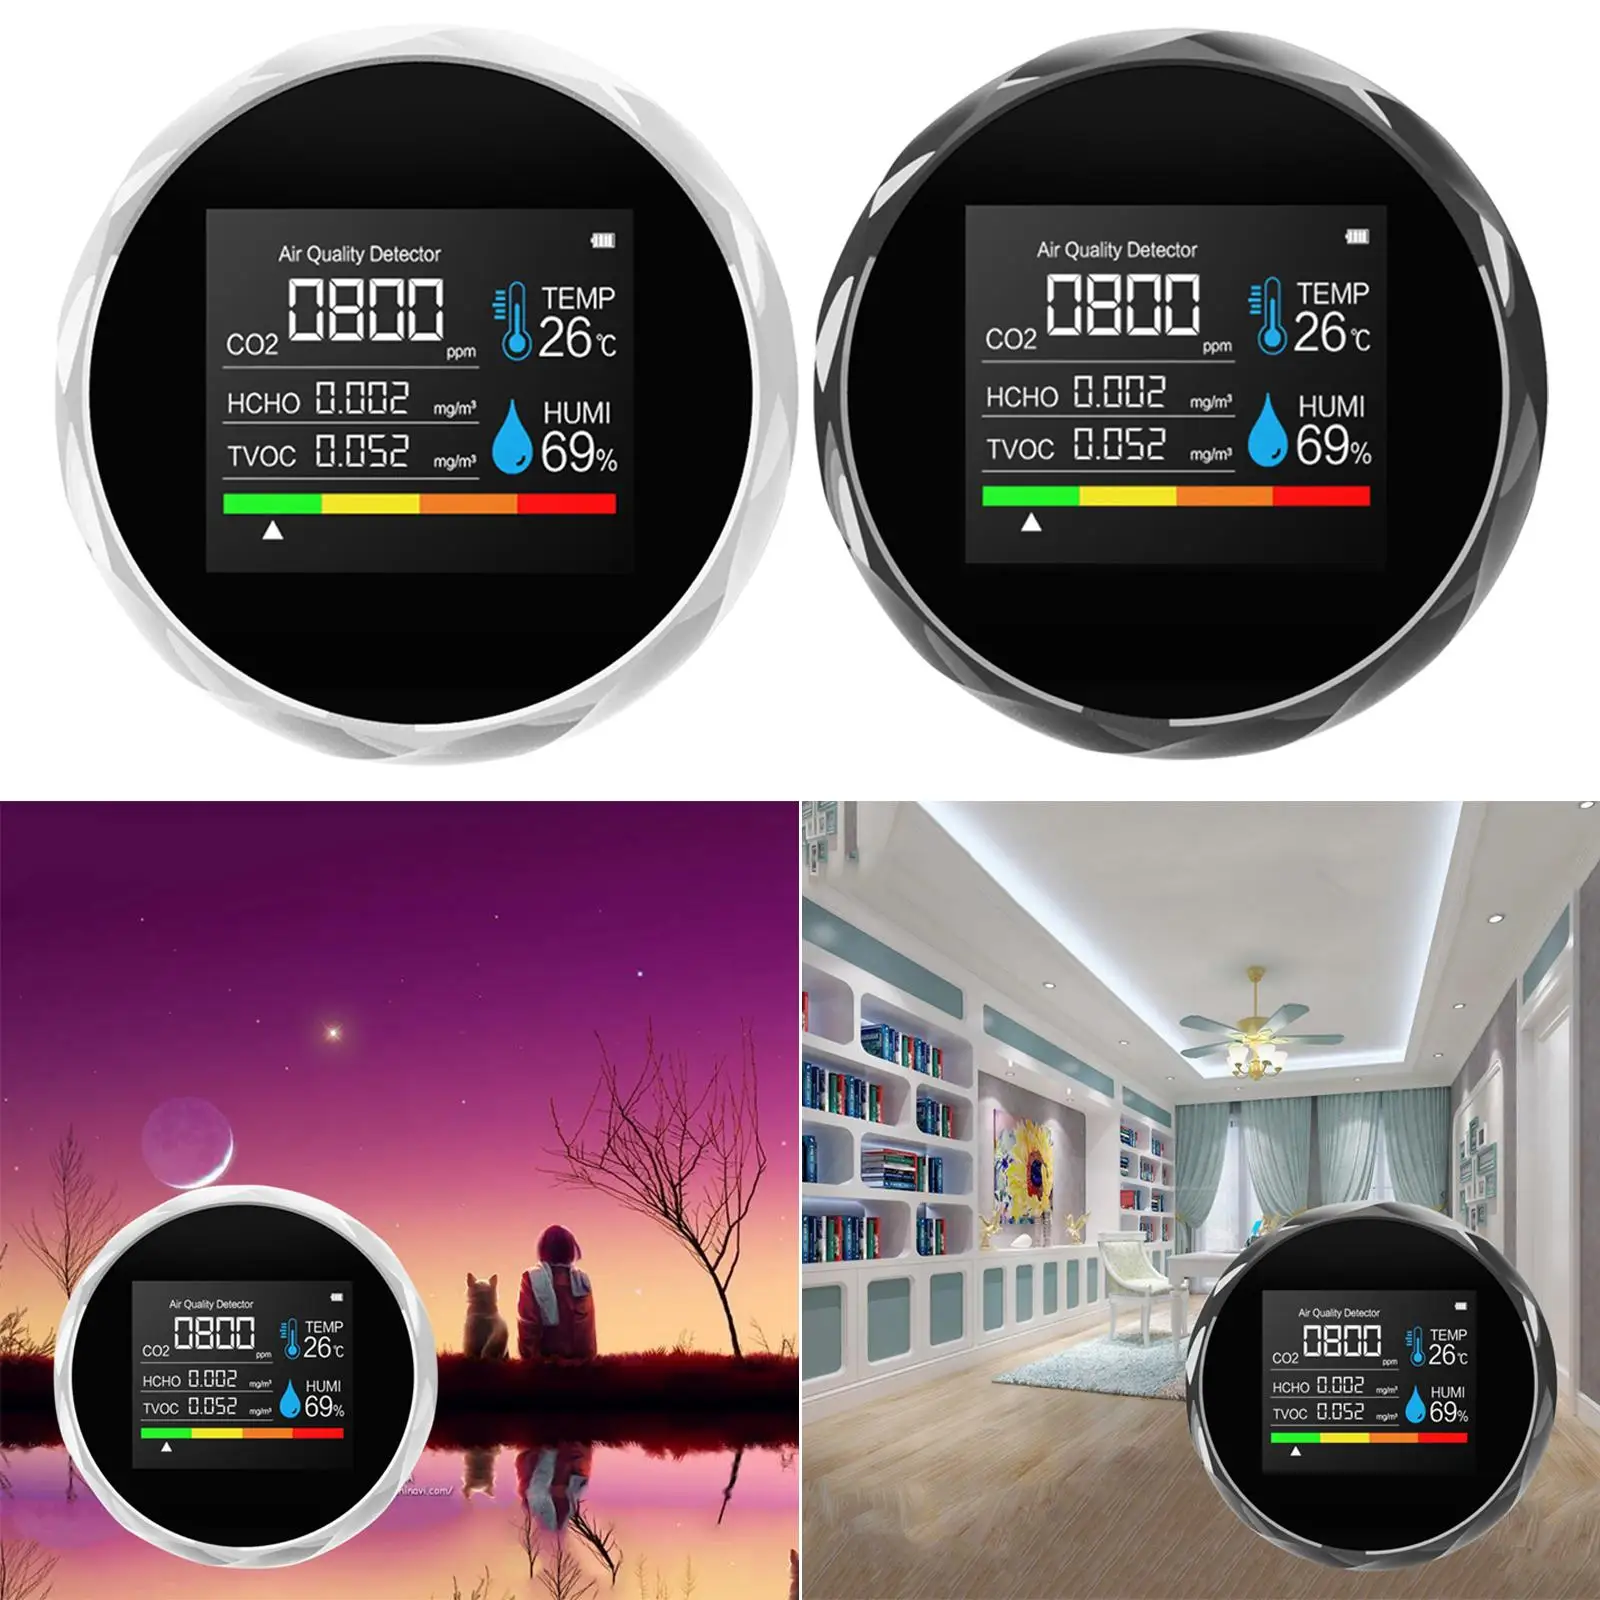 Air Quality Monitor 2, , Temperature, Humidity, Air Pollution Detector for  Carbon Dioxide Detector